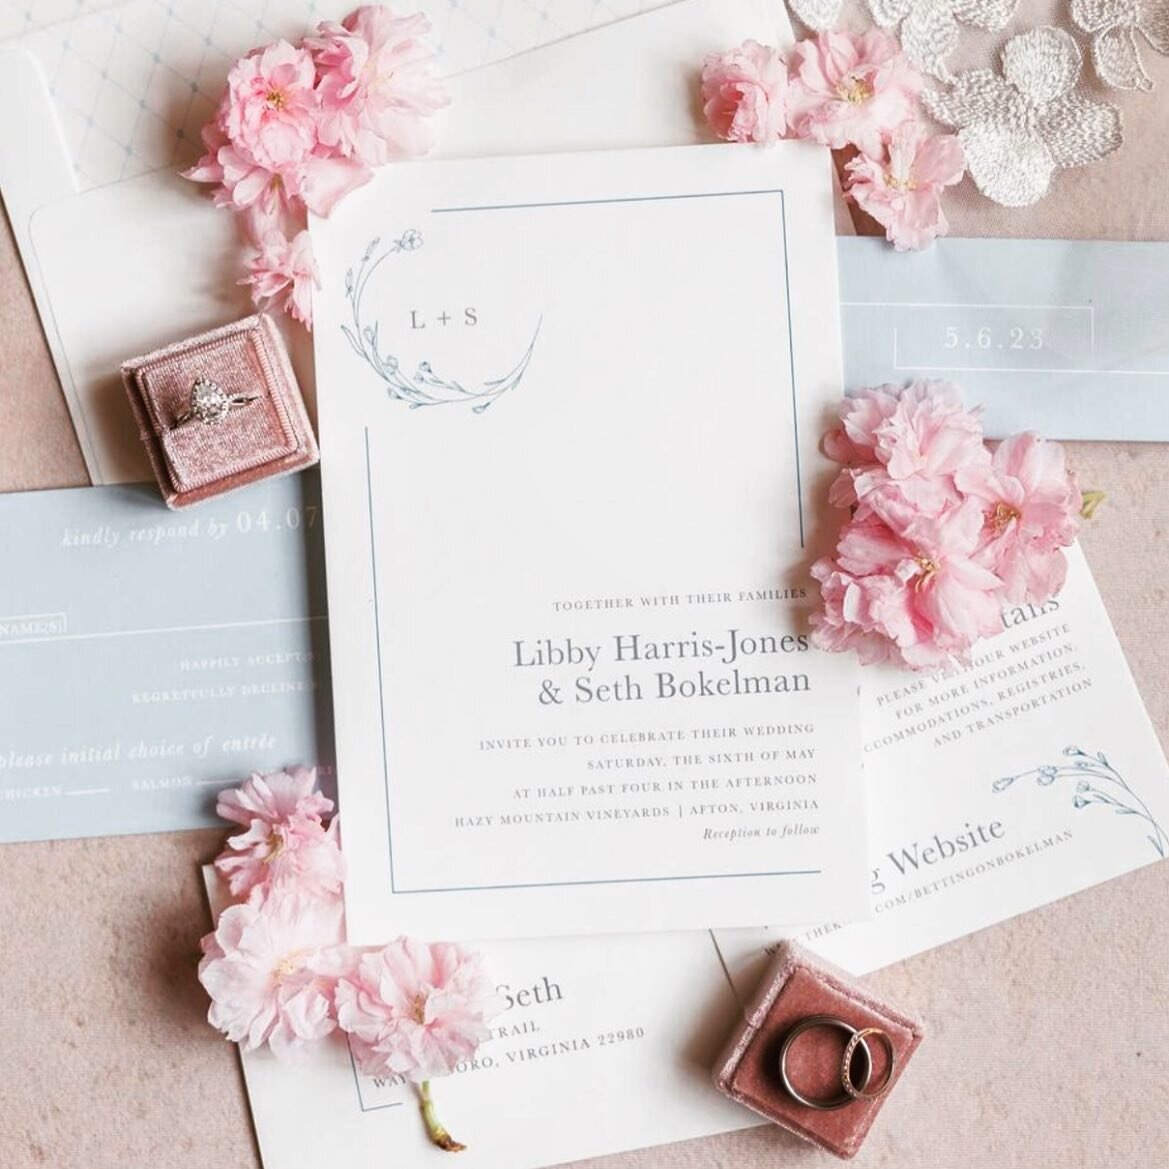 Love the spring details from this beautiful wedding! 

Special thank you to these vendors:

Photography | @hannahjphotos 
Videography | @prettyweddingfilms 
Florals | @tourterelle_floral 
Rentals | @paisleyandjade 
DJ | @pteventgroup 
Stationary | @r